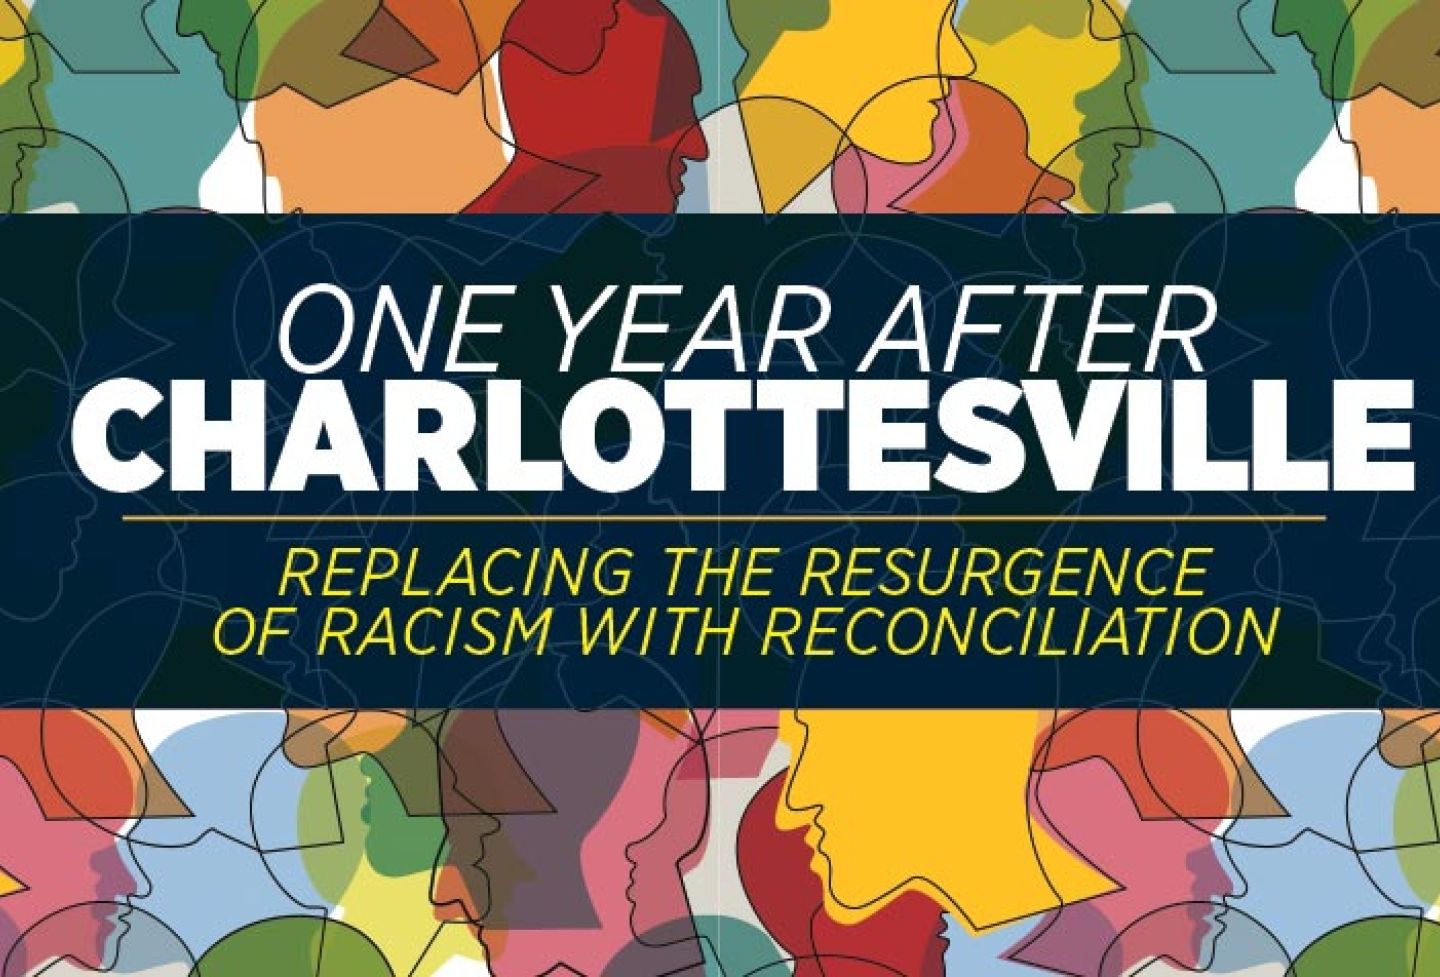 “One Year After Charlottesville: Replacing the Resurgence of Racism With Reconciliation”